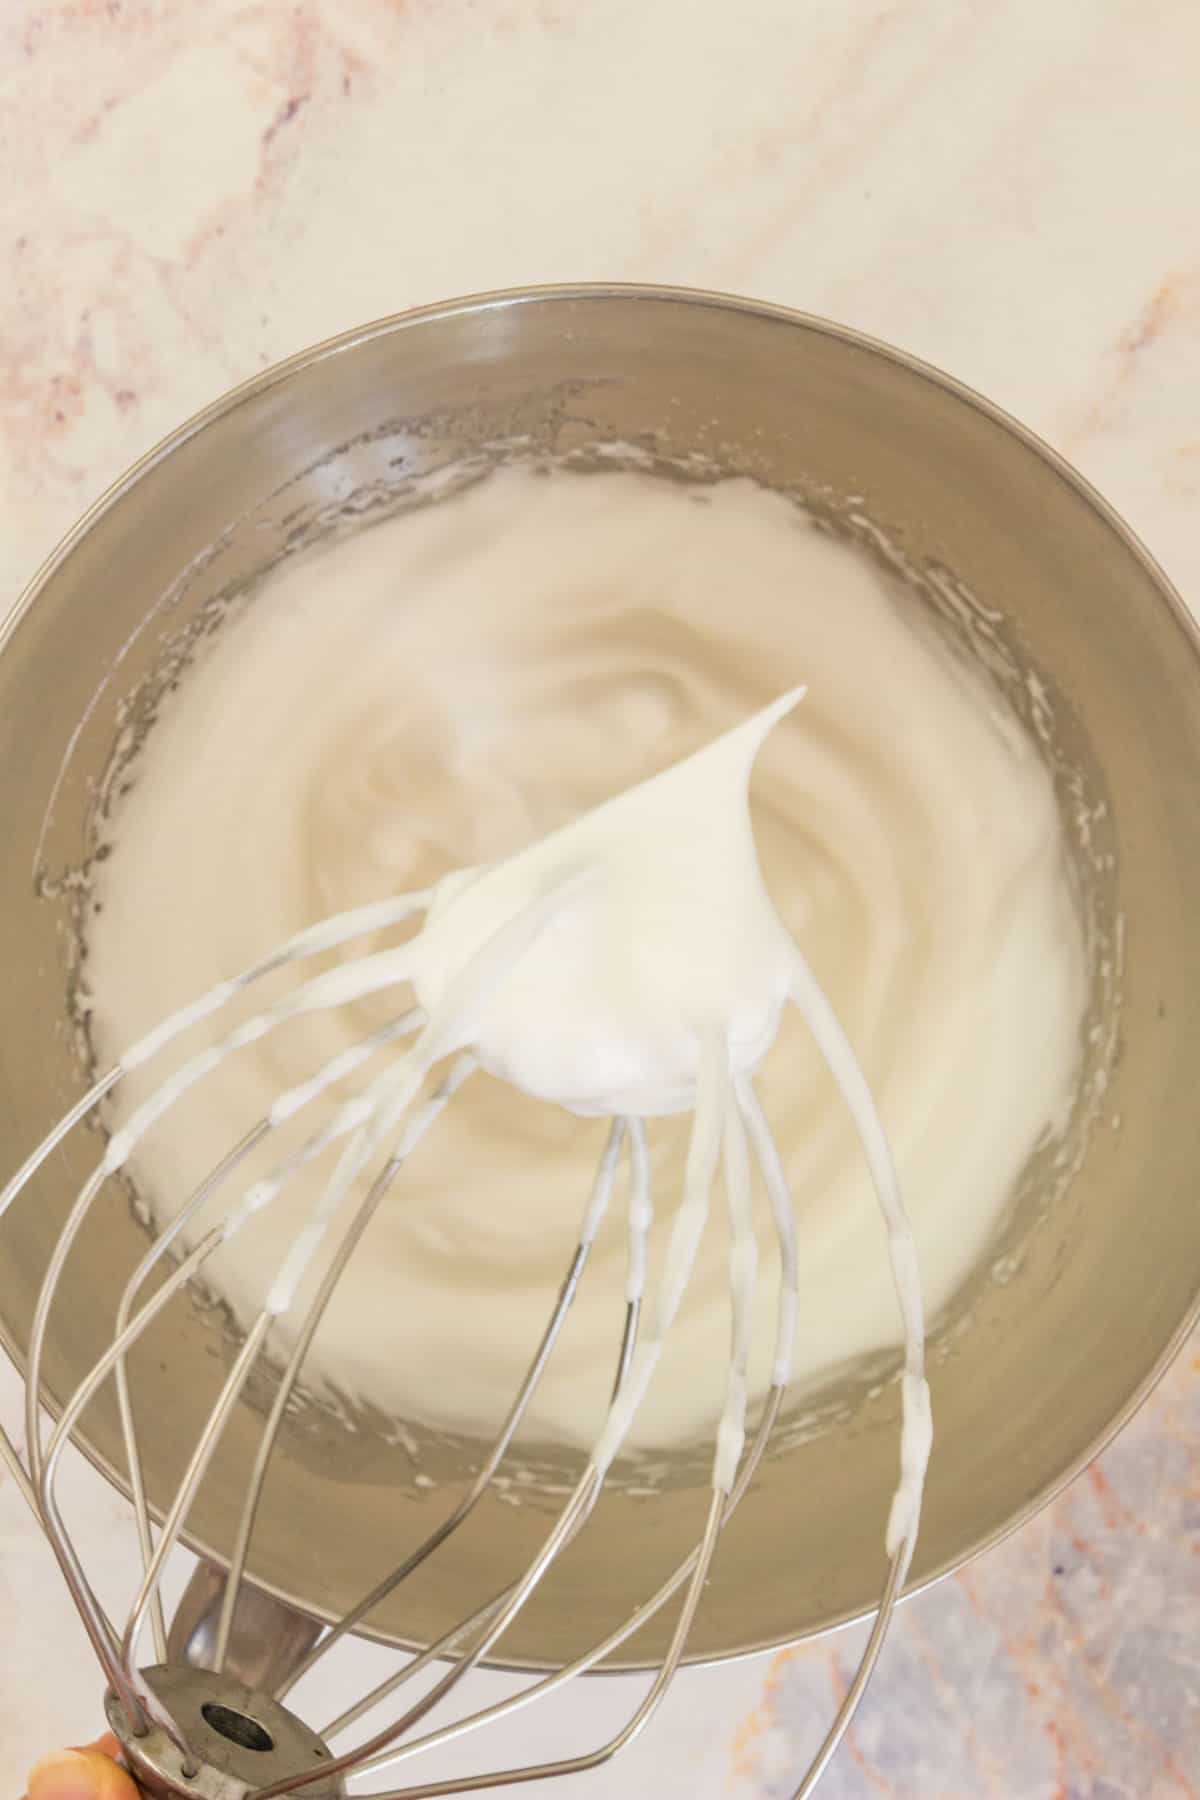 A whisk with a meringue peak held up in front of whipped egg whites and sugar in a mixing bowl.